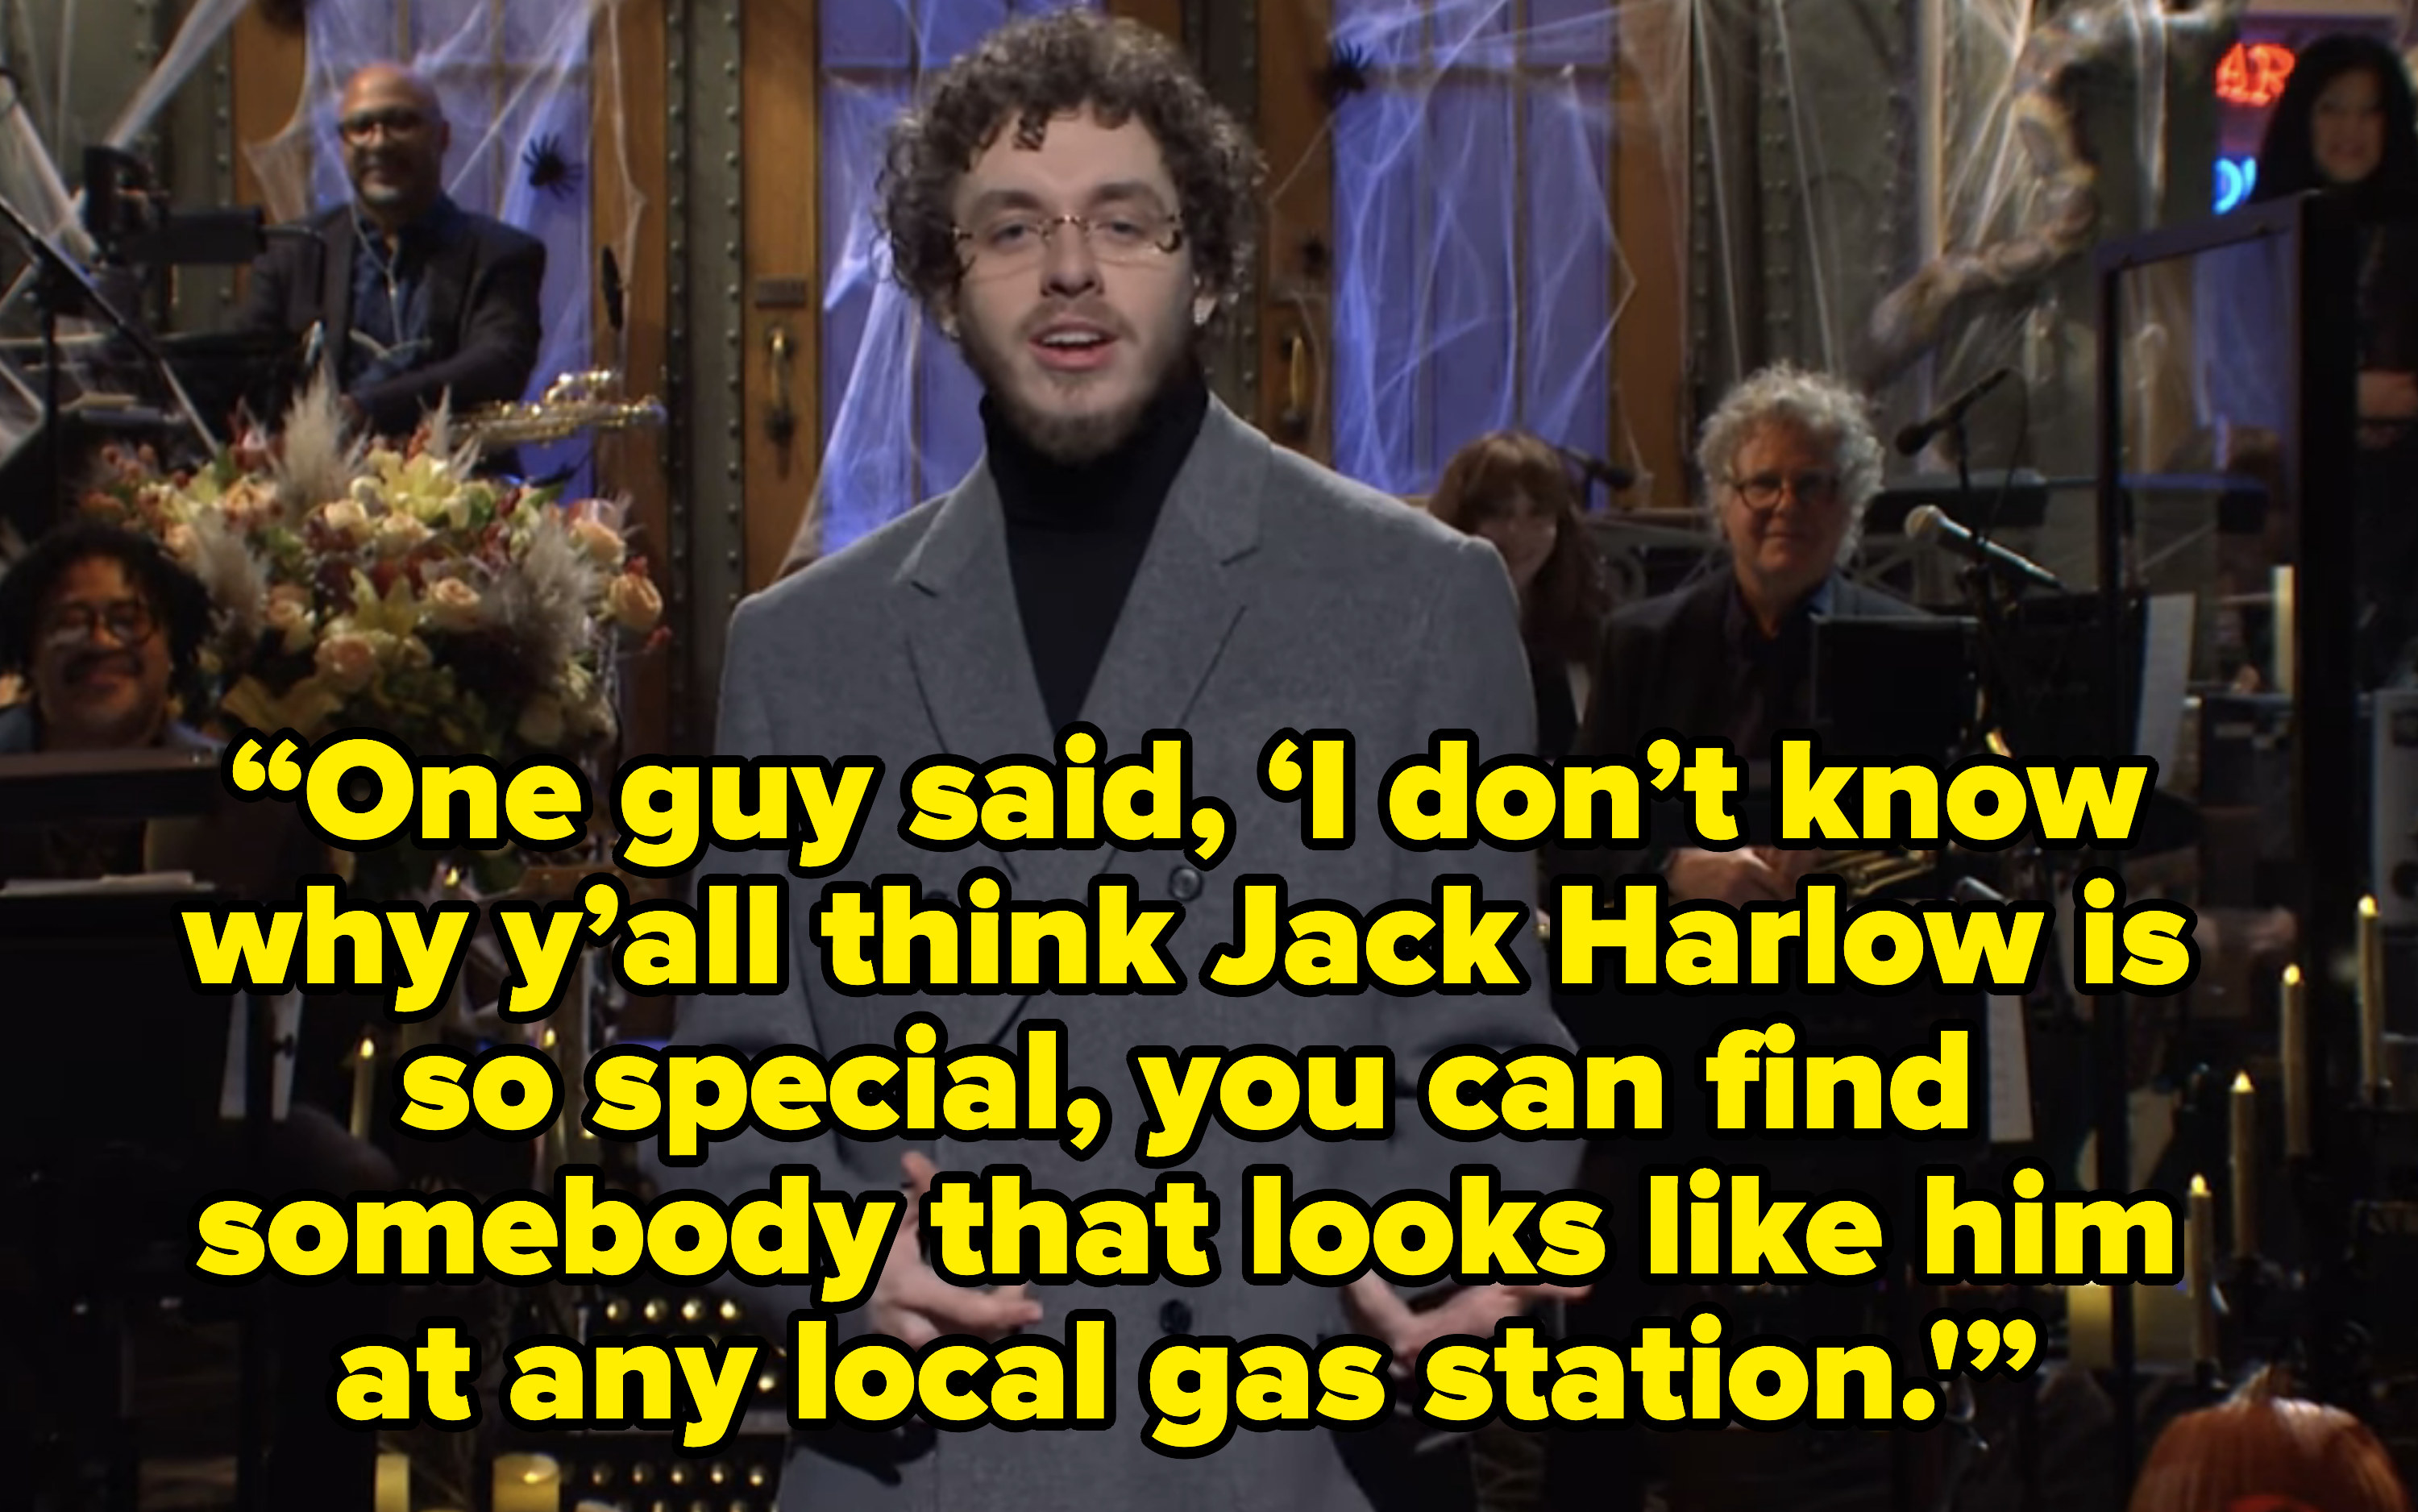 &quot;One guy said, &#x27;I don&#x27;t know why y&#x27;all think Jack Harlow is so special, you can find somebody that looks like him at any local gas station.&#x27;&quot;